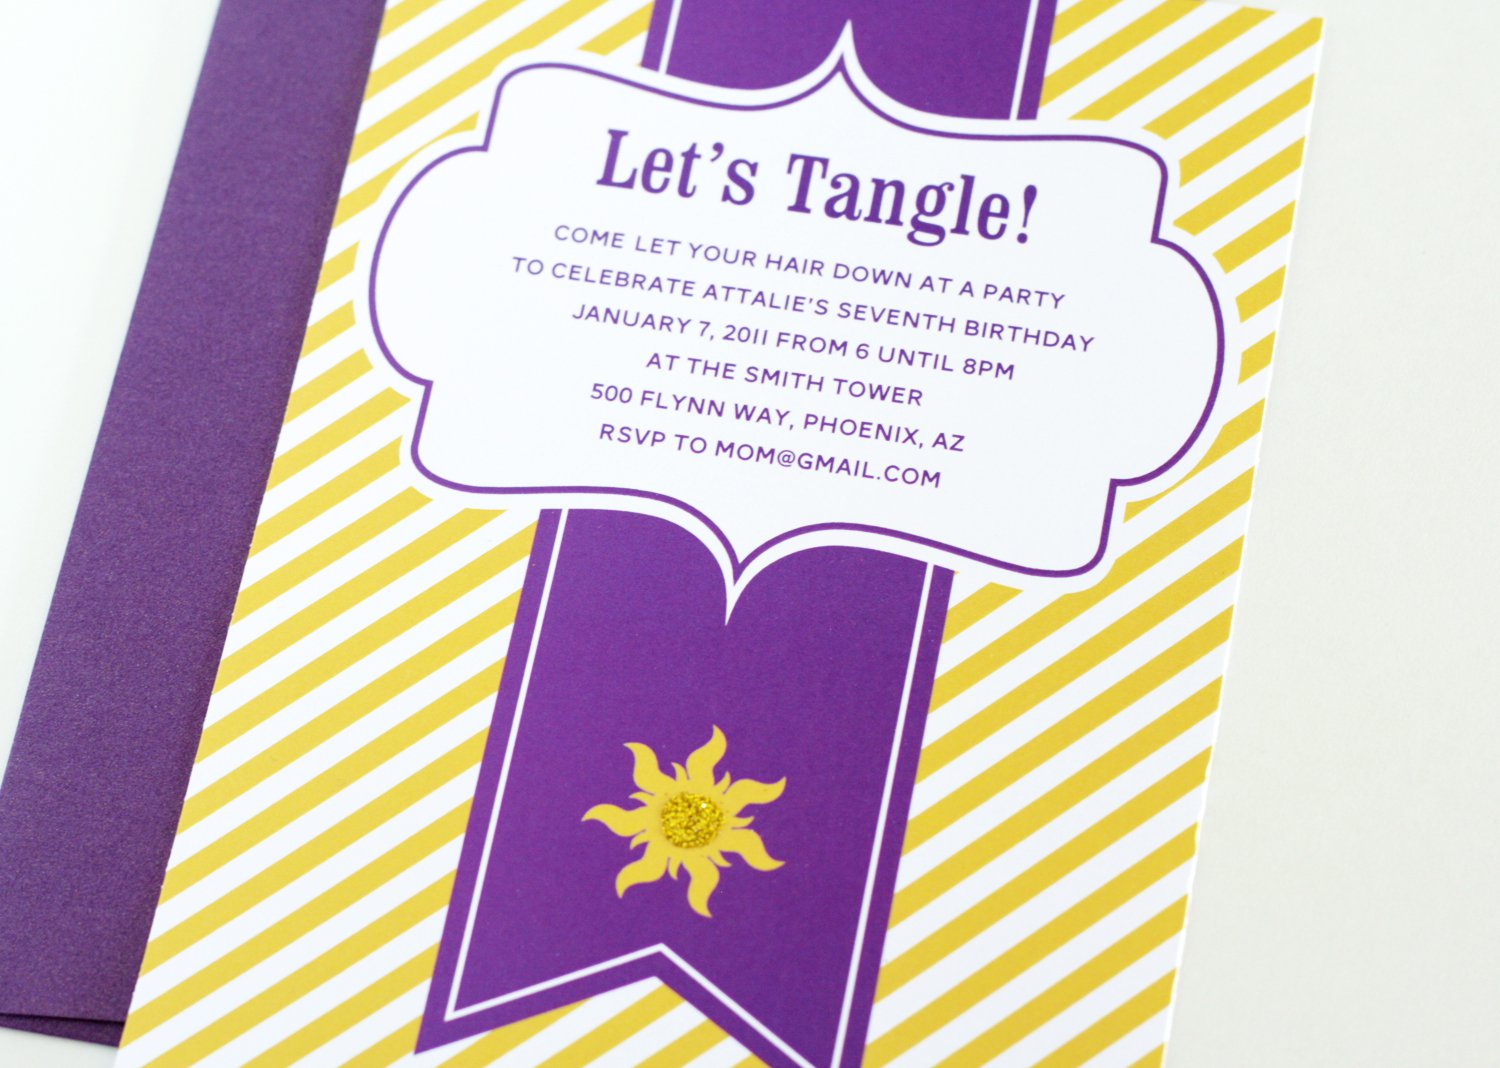 Tangled Birthday Party Invitation Template